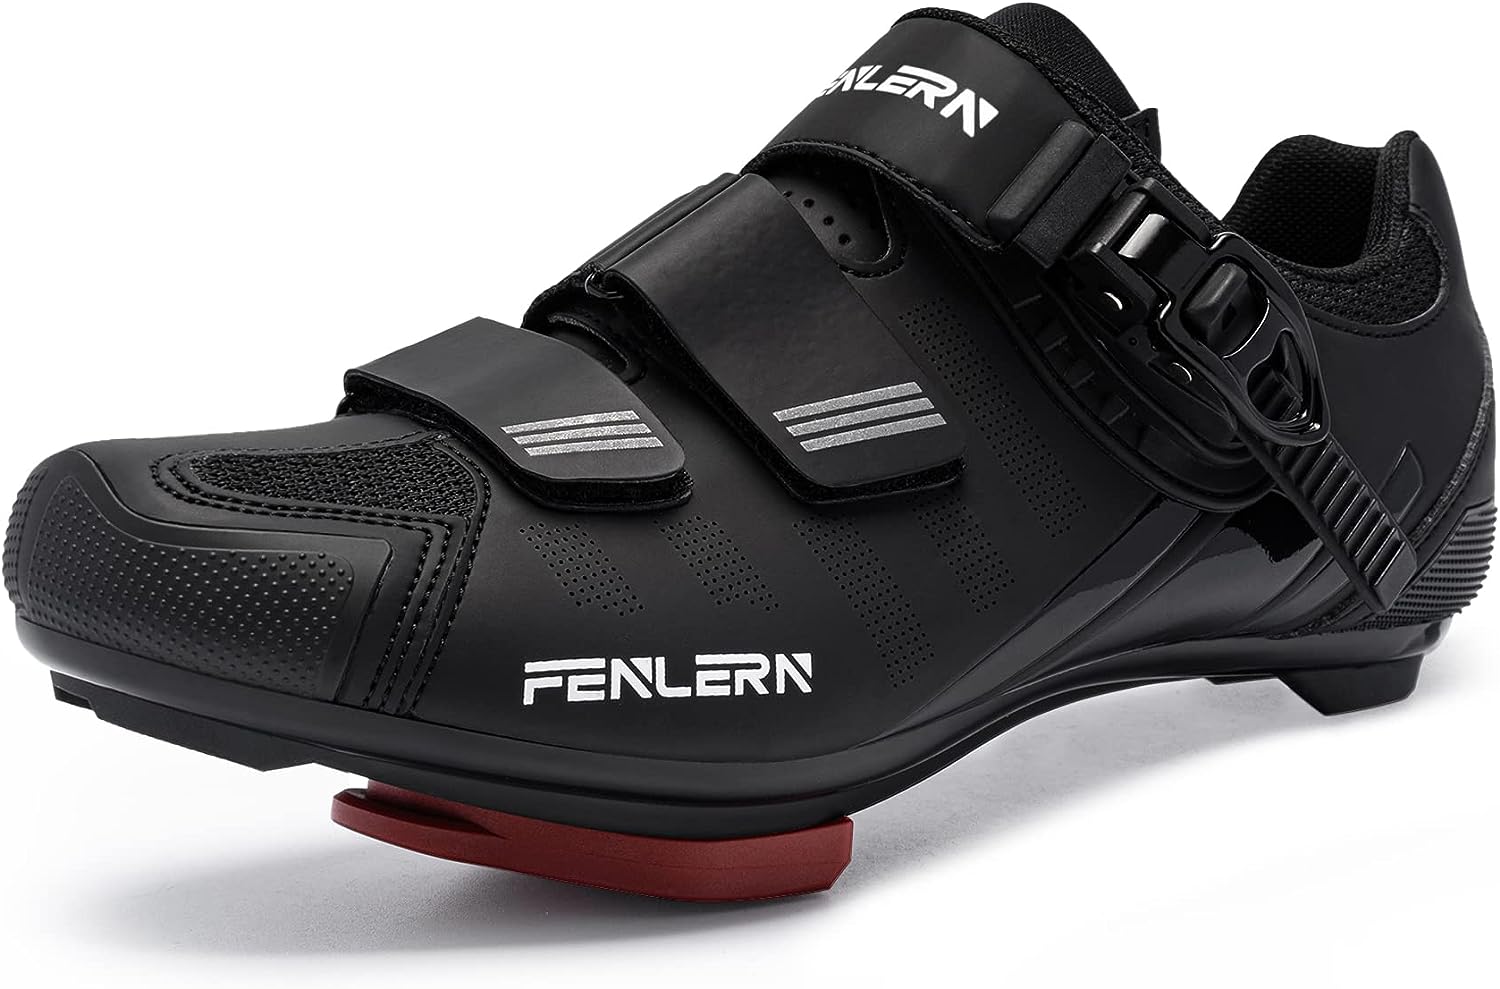 FENLERN Cycling Shoes for Men Women Compatible with [...]